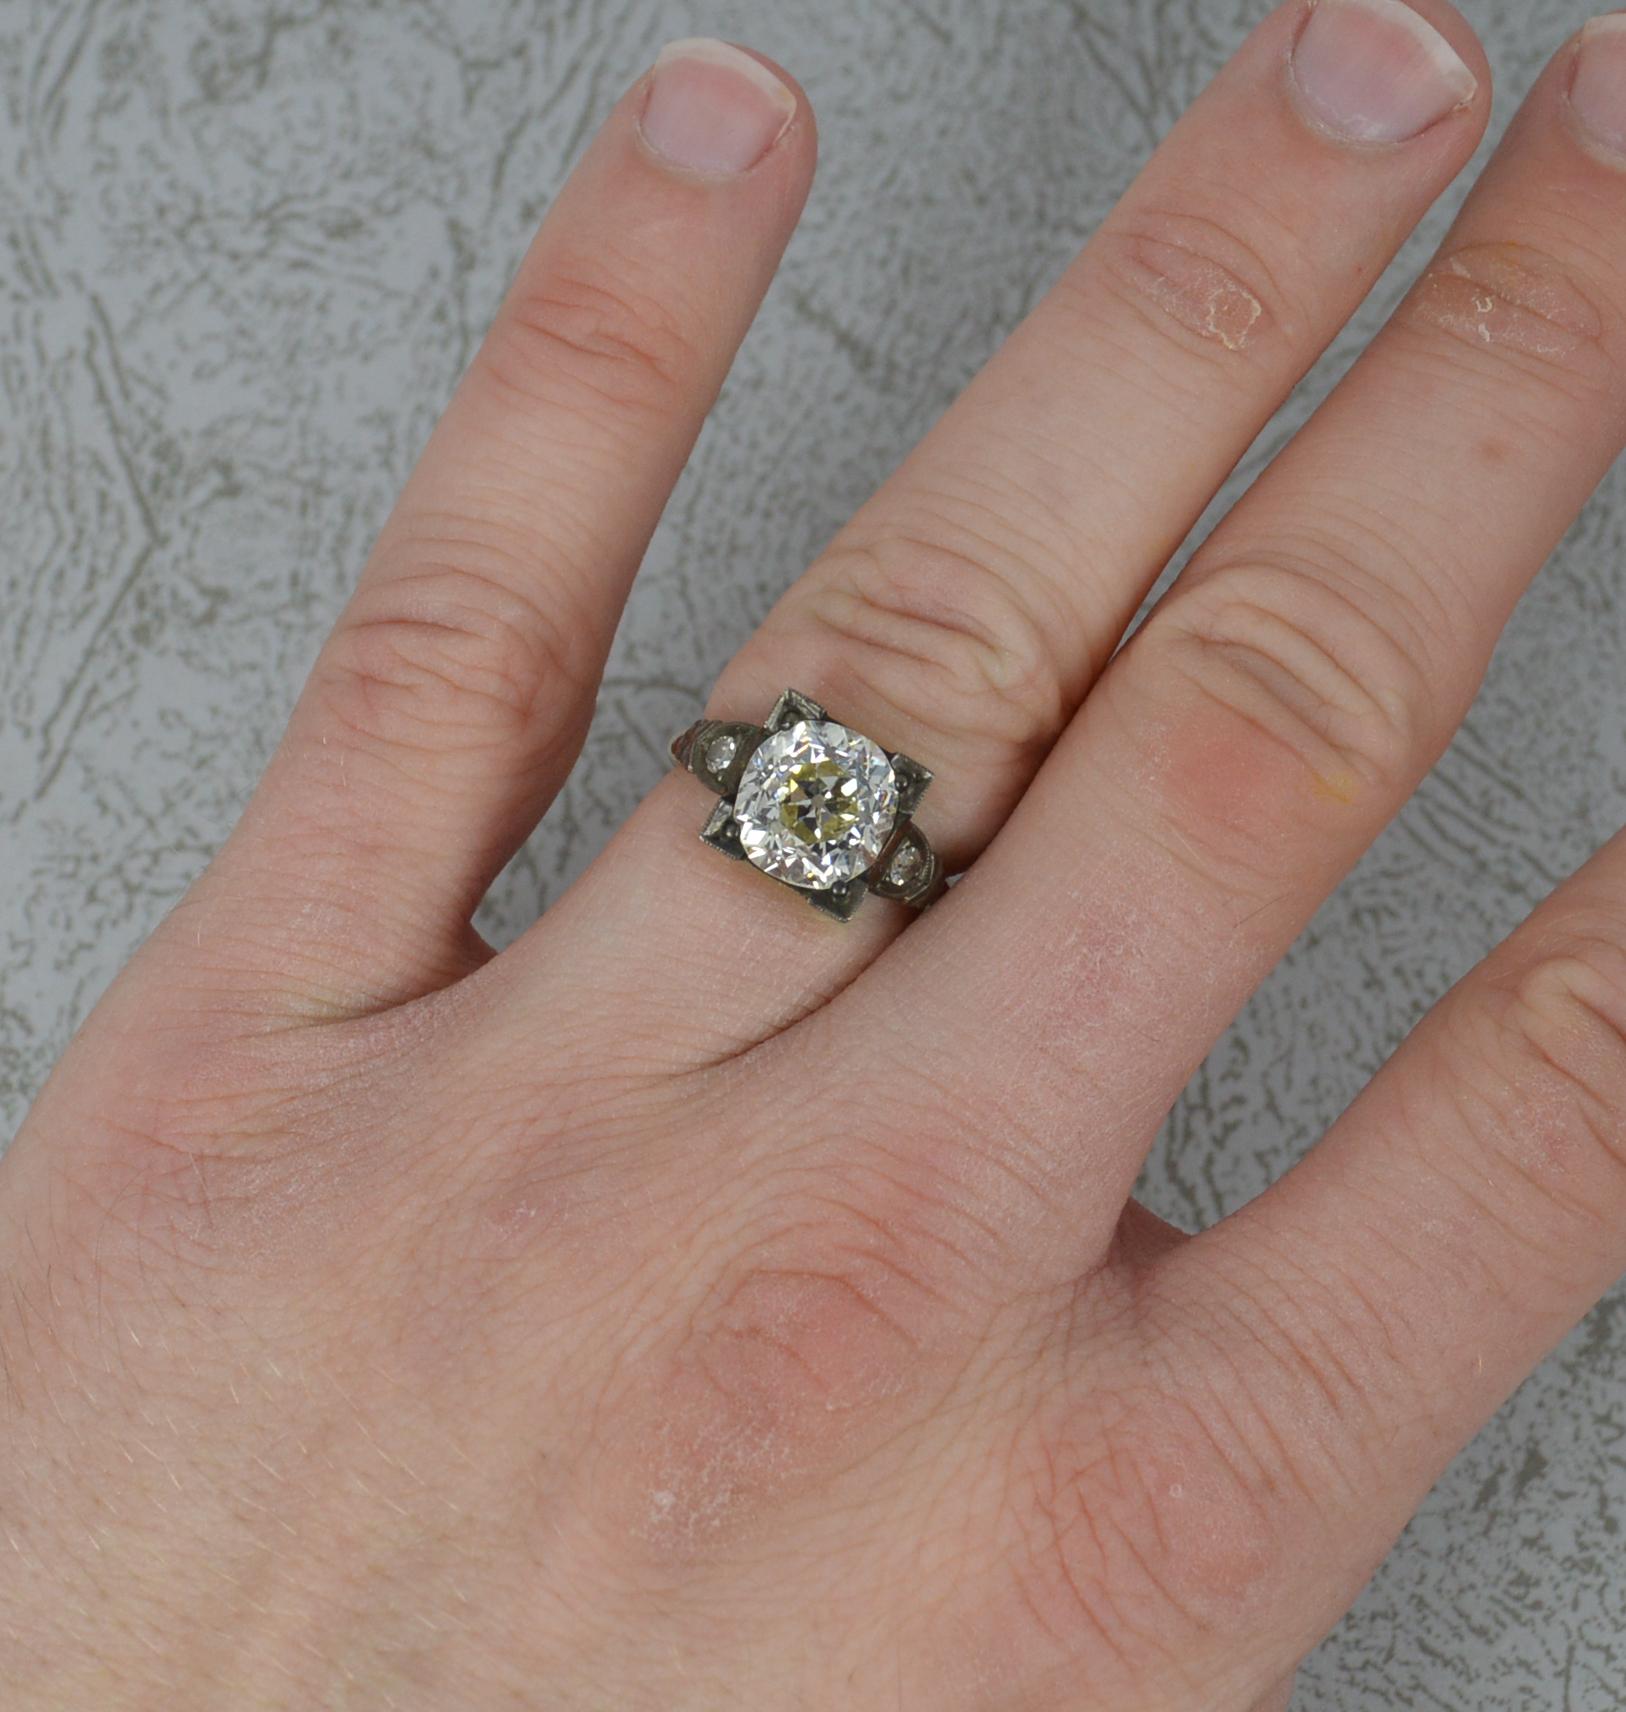 One stunning old cut diamond engagement ring.
A late Victorian piece, circa 1900. 18 carat yellow gold shank.
Designed with one very large, natural old cut diamond to centre. 9.1mm x 9.4mm approx, 3.25 carats. Complete with a smaller old cut diamond